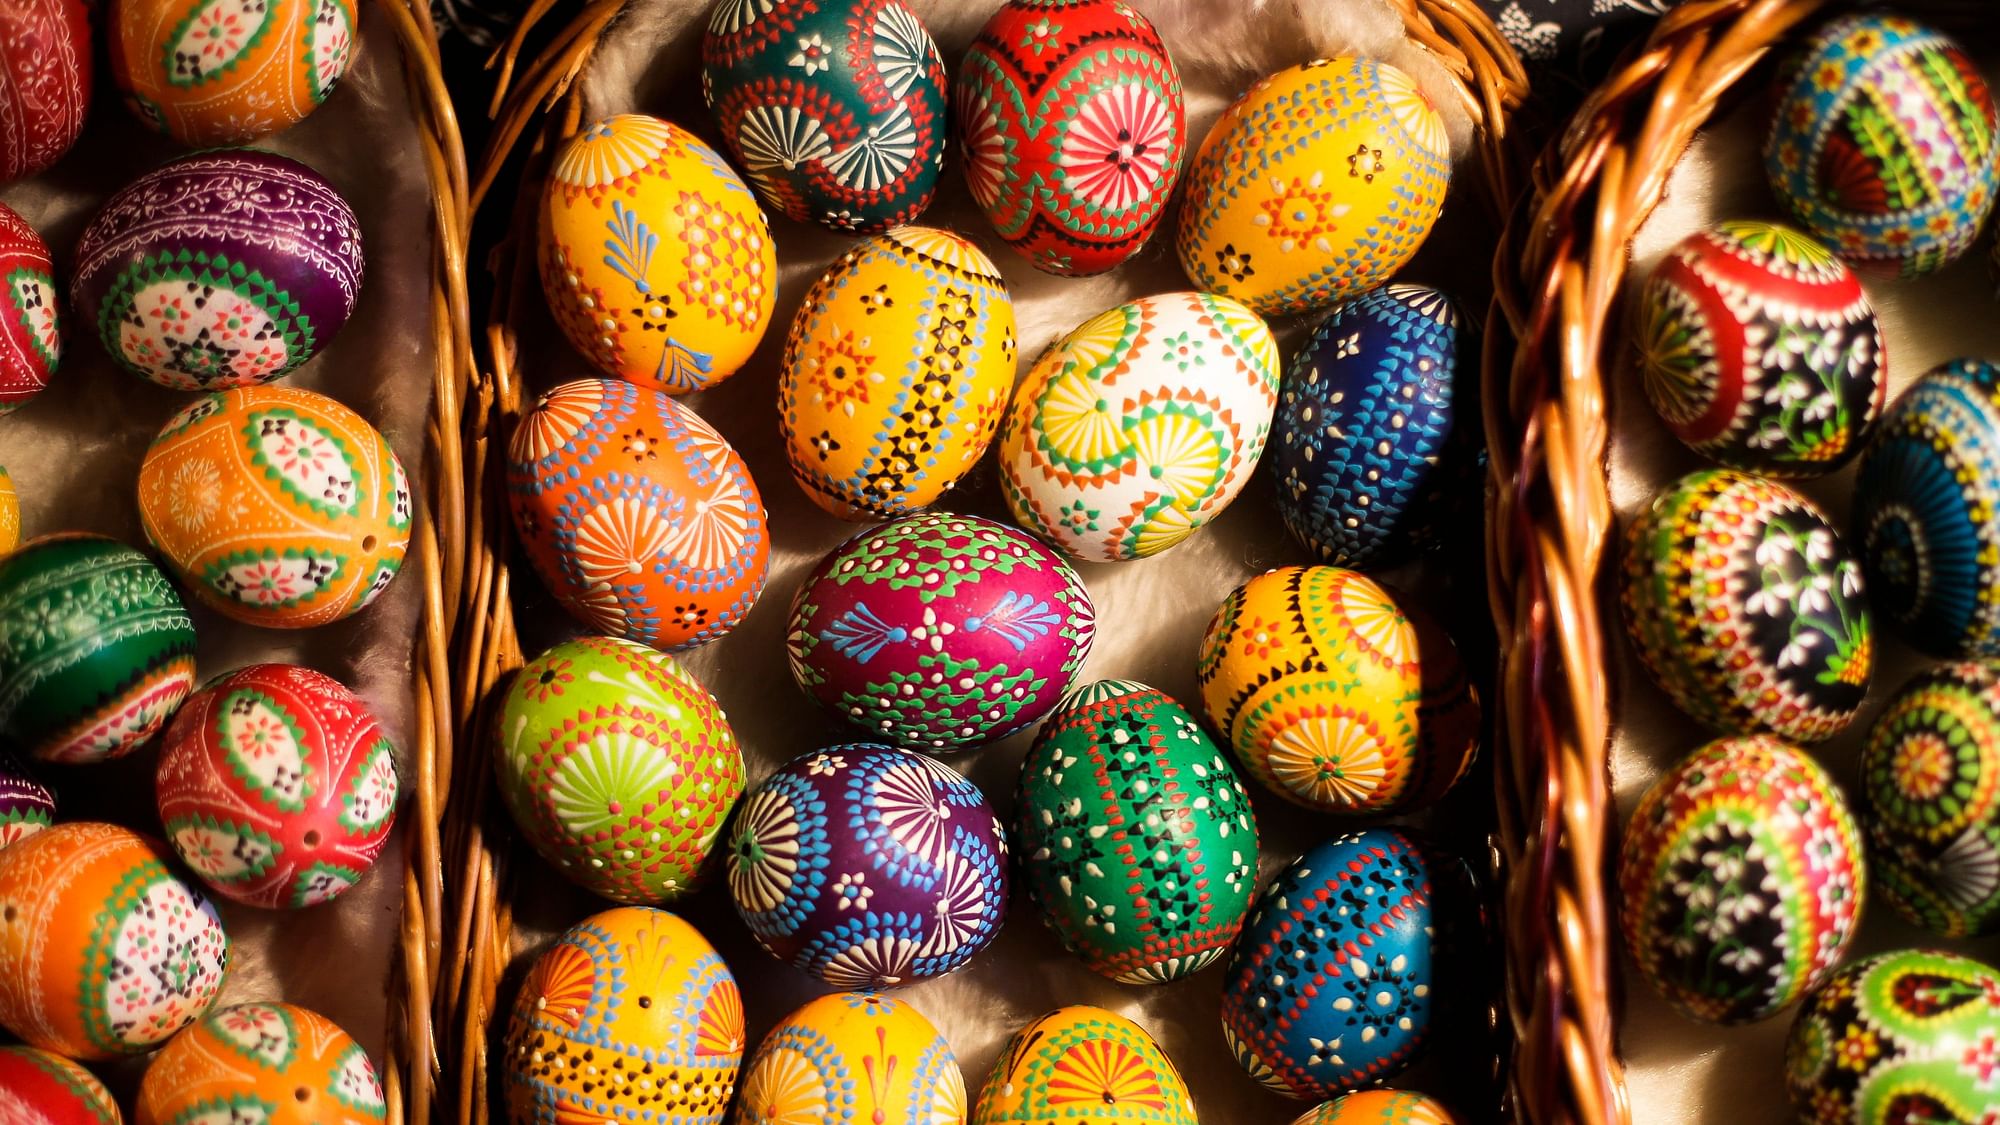 Easter 2019 Wishes: Most people from the Christian community decorate Easter eggs and treat each other with sweet delicacies, especially chocolates, to mark this day.